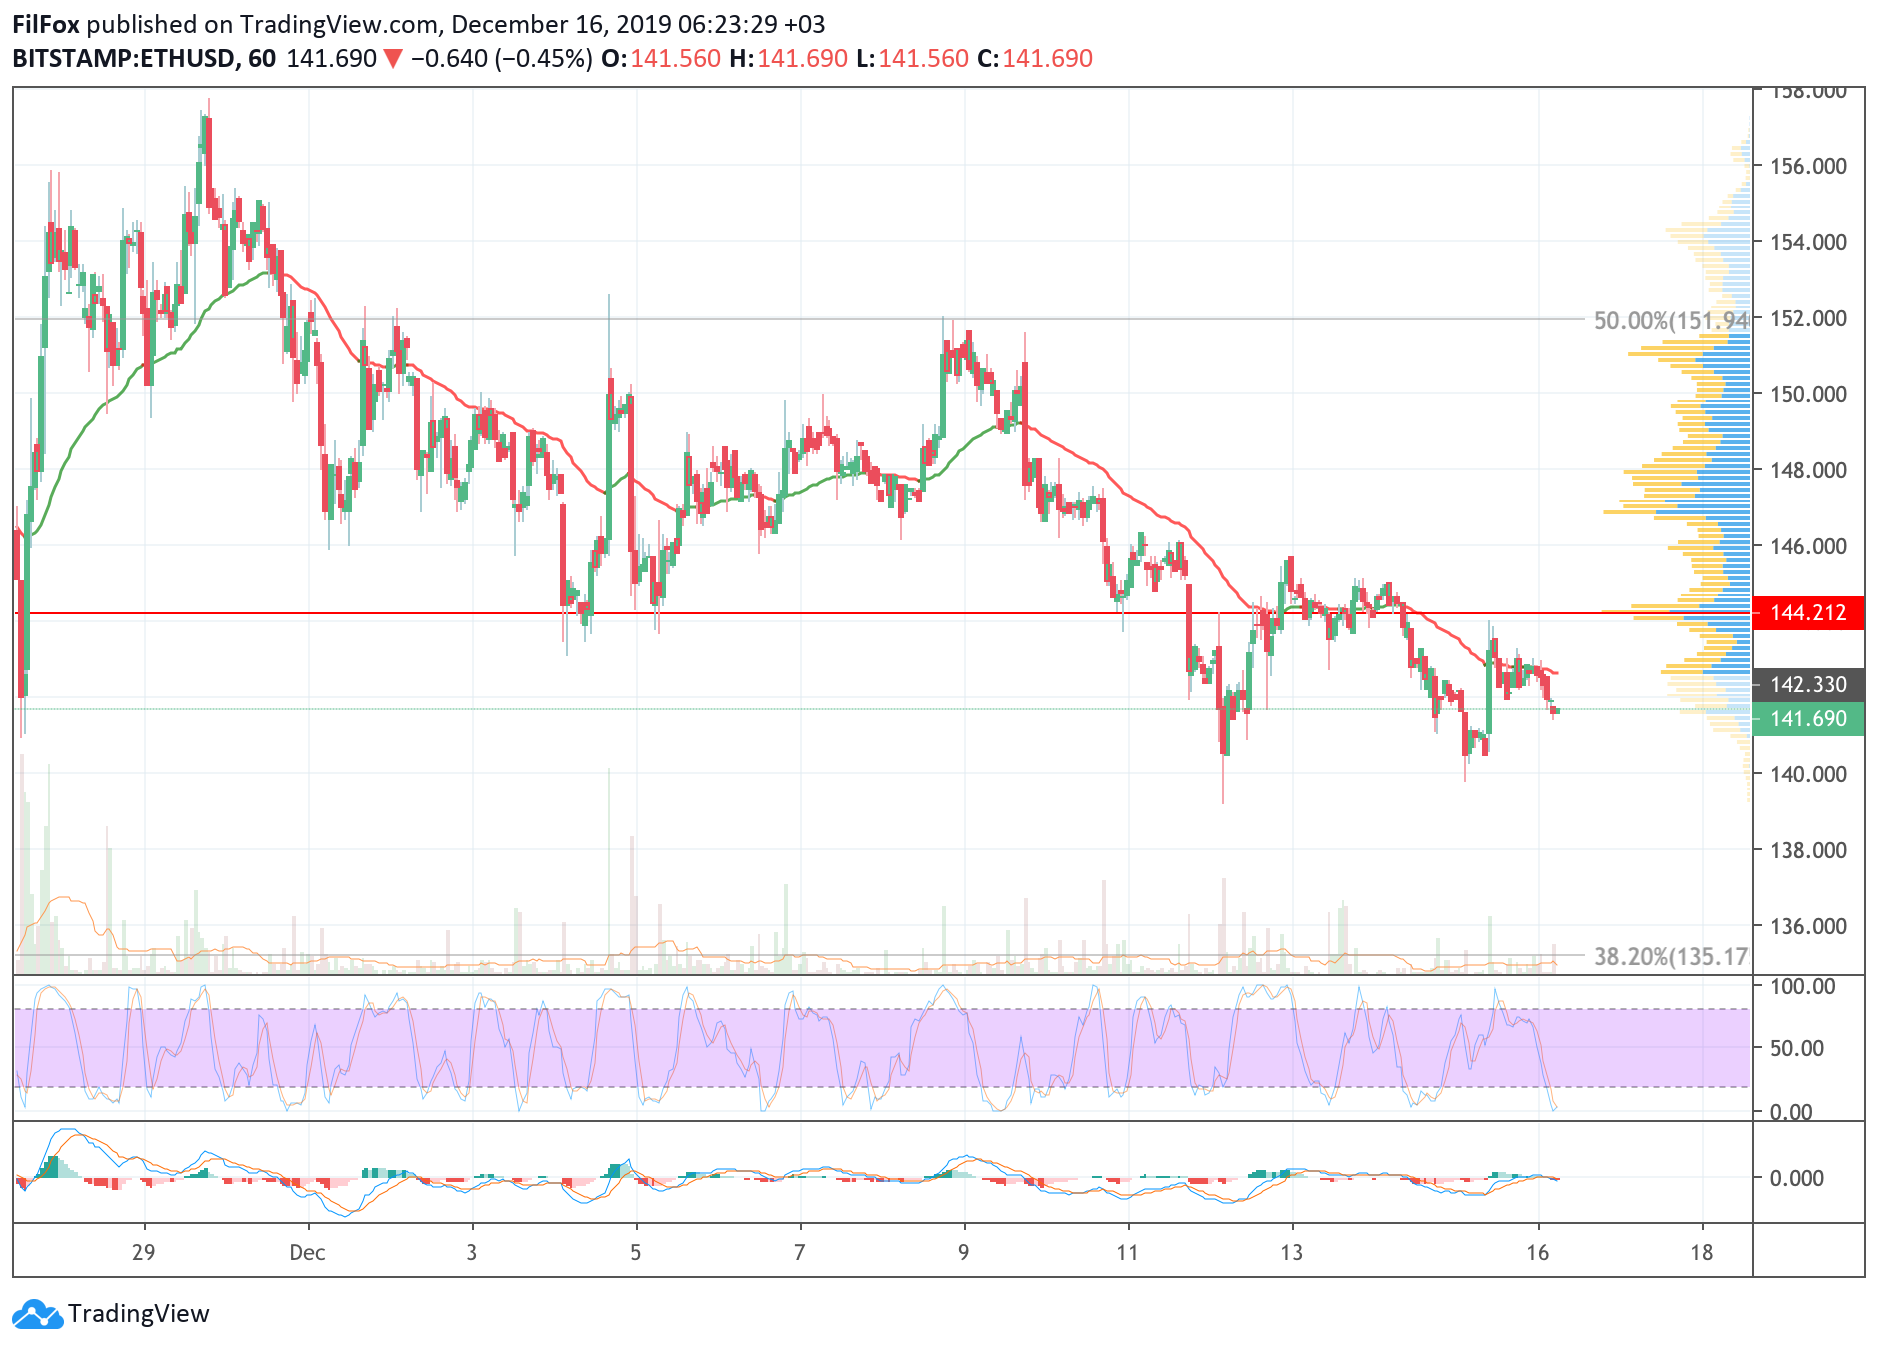 Analysis of cryptocurrency pairs BTC / USD, ETH / USD and XRP / USD on 12.16.2019